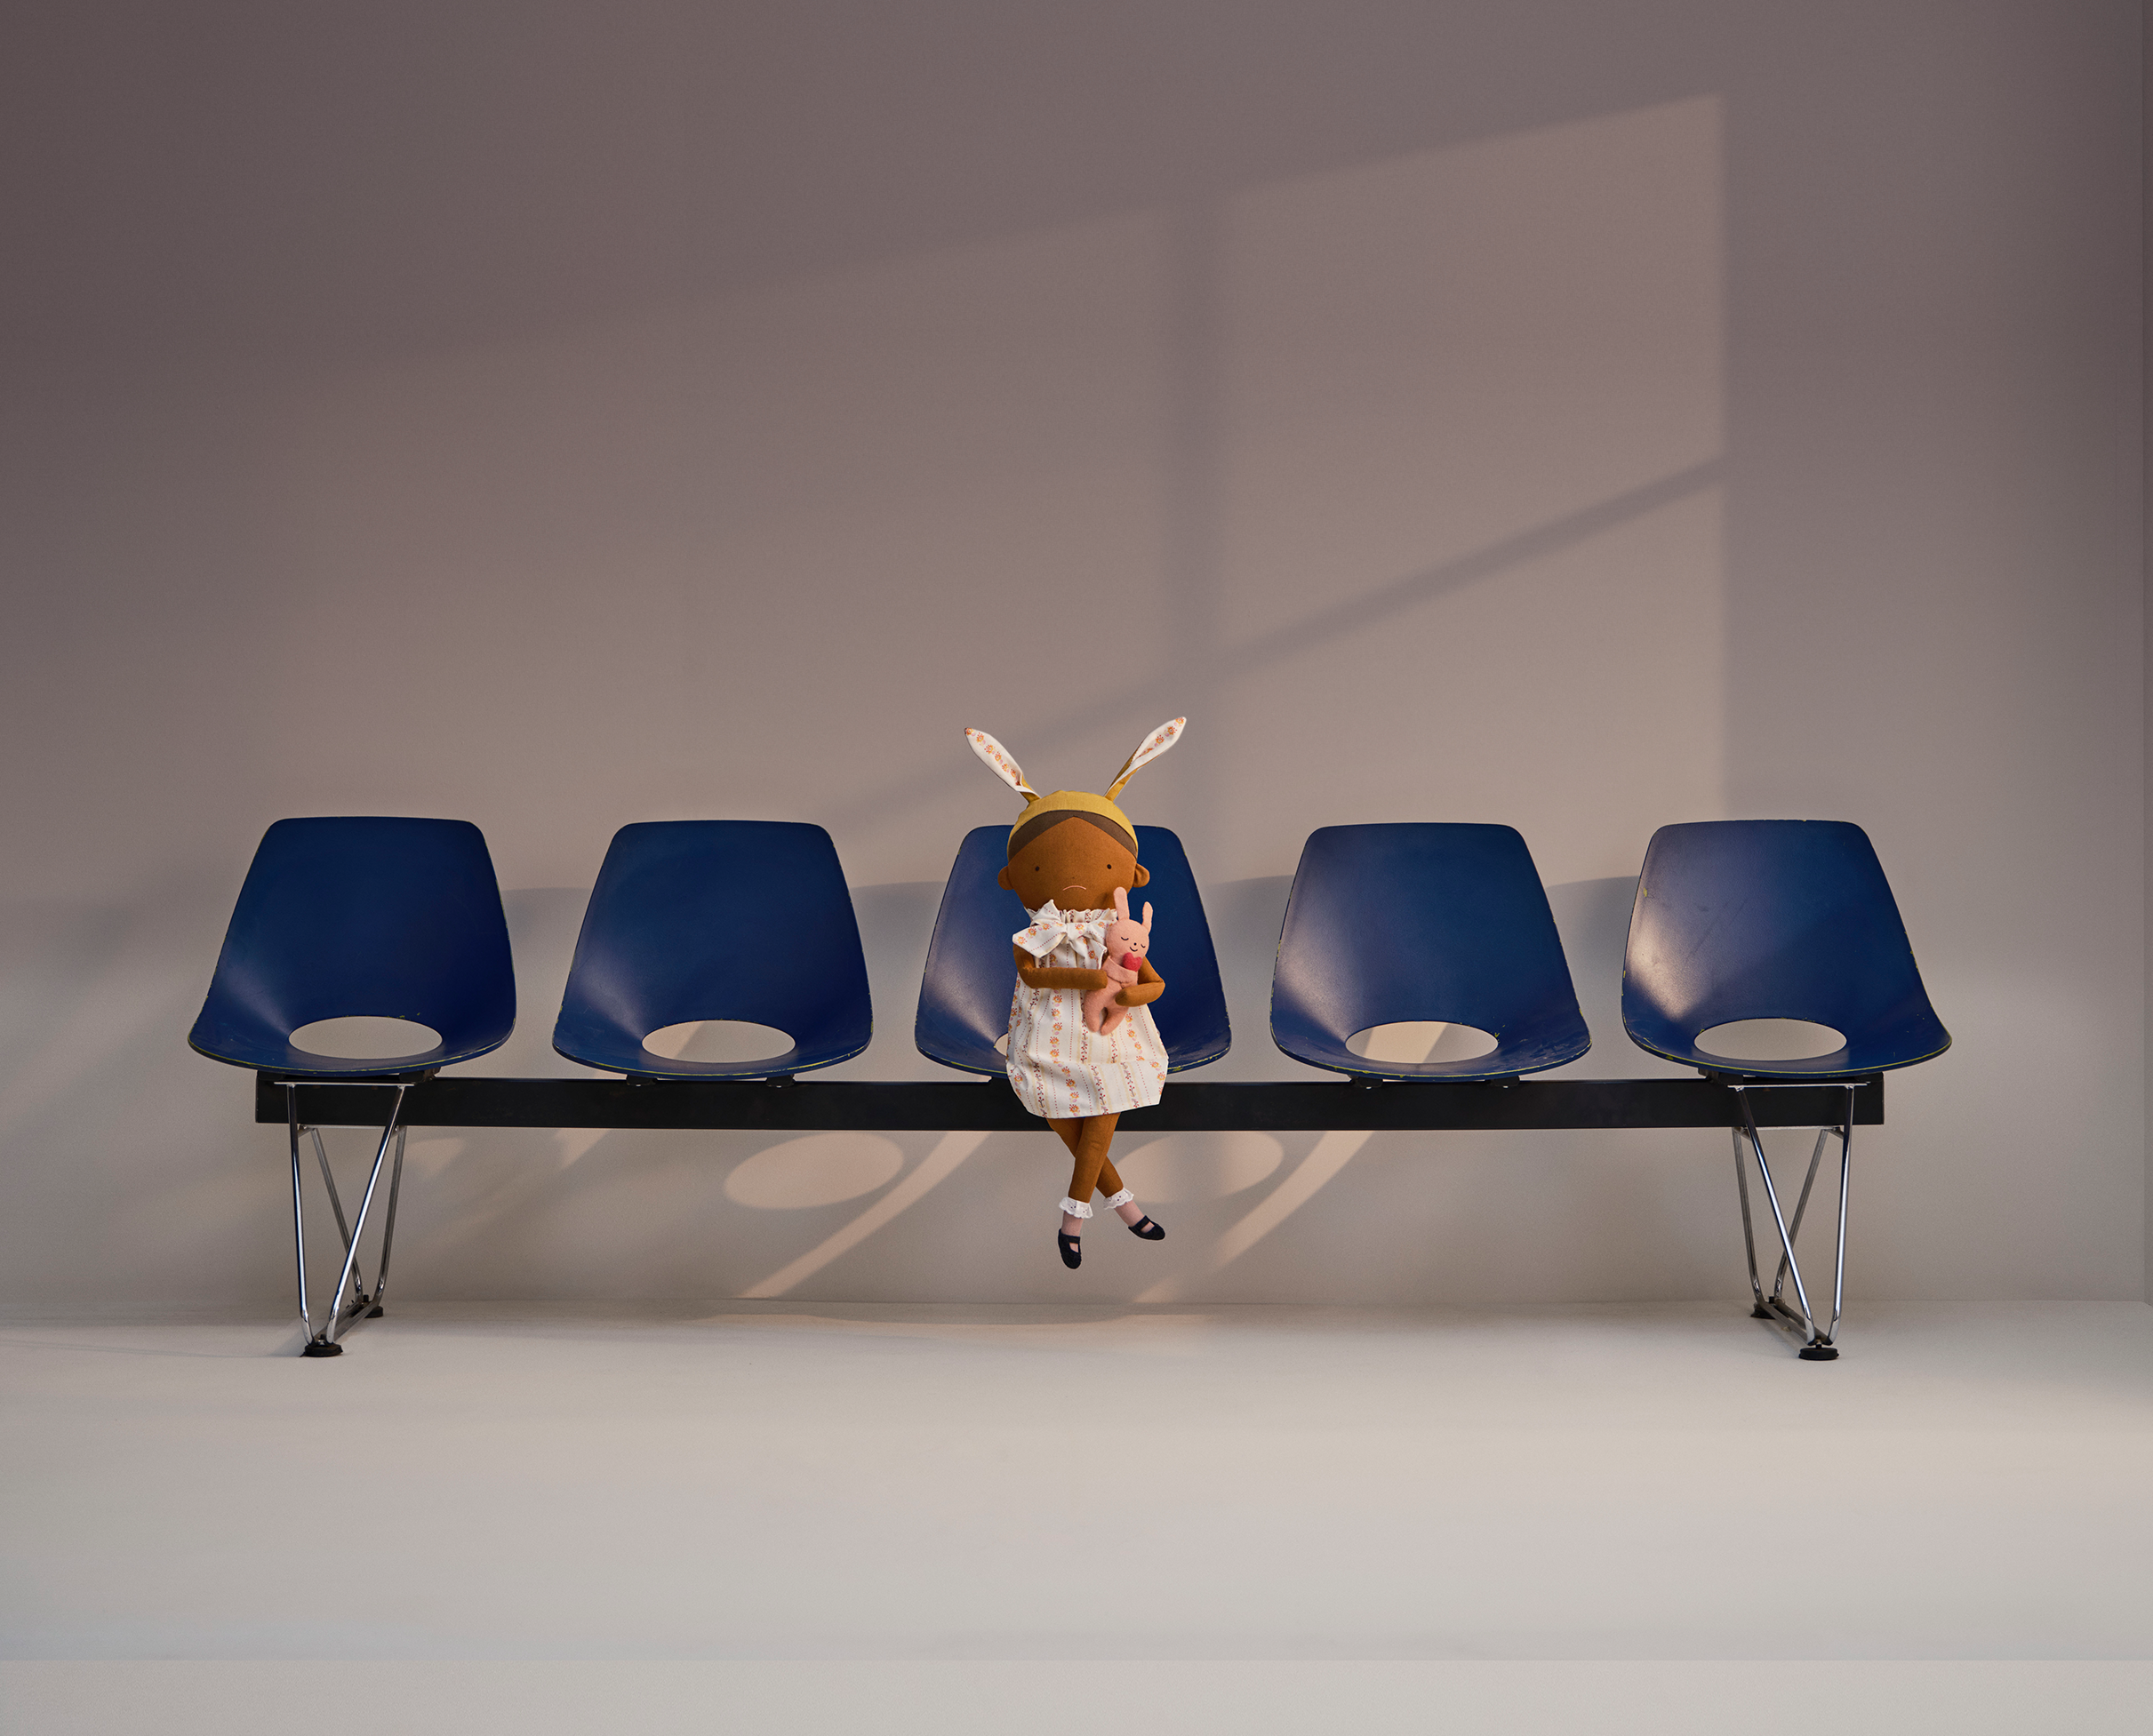 Amelia's doll sitting on some chairs